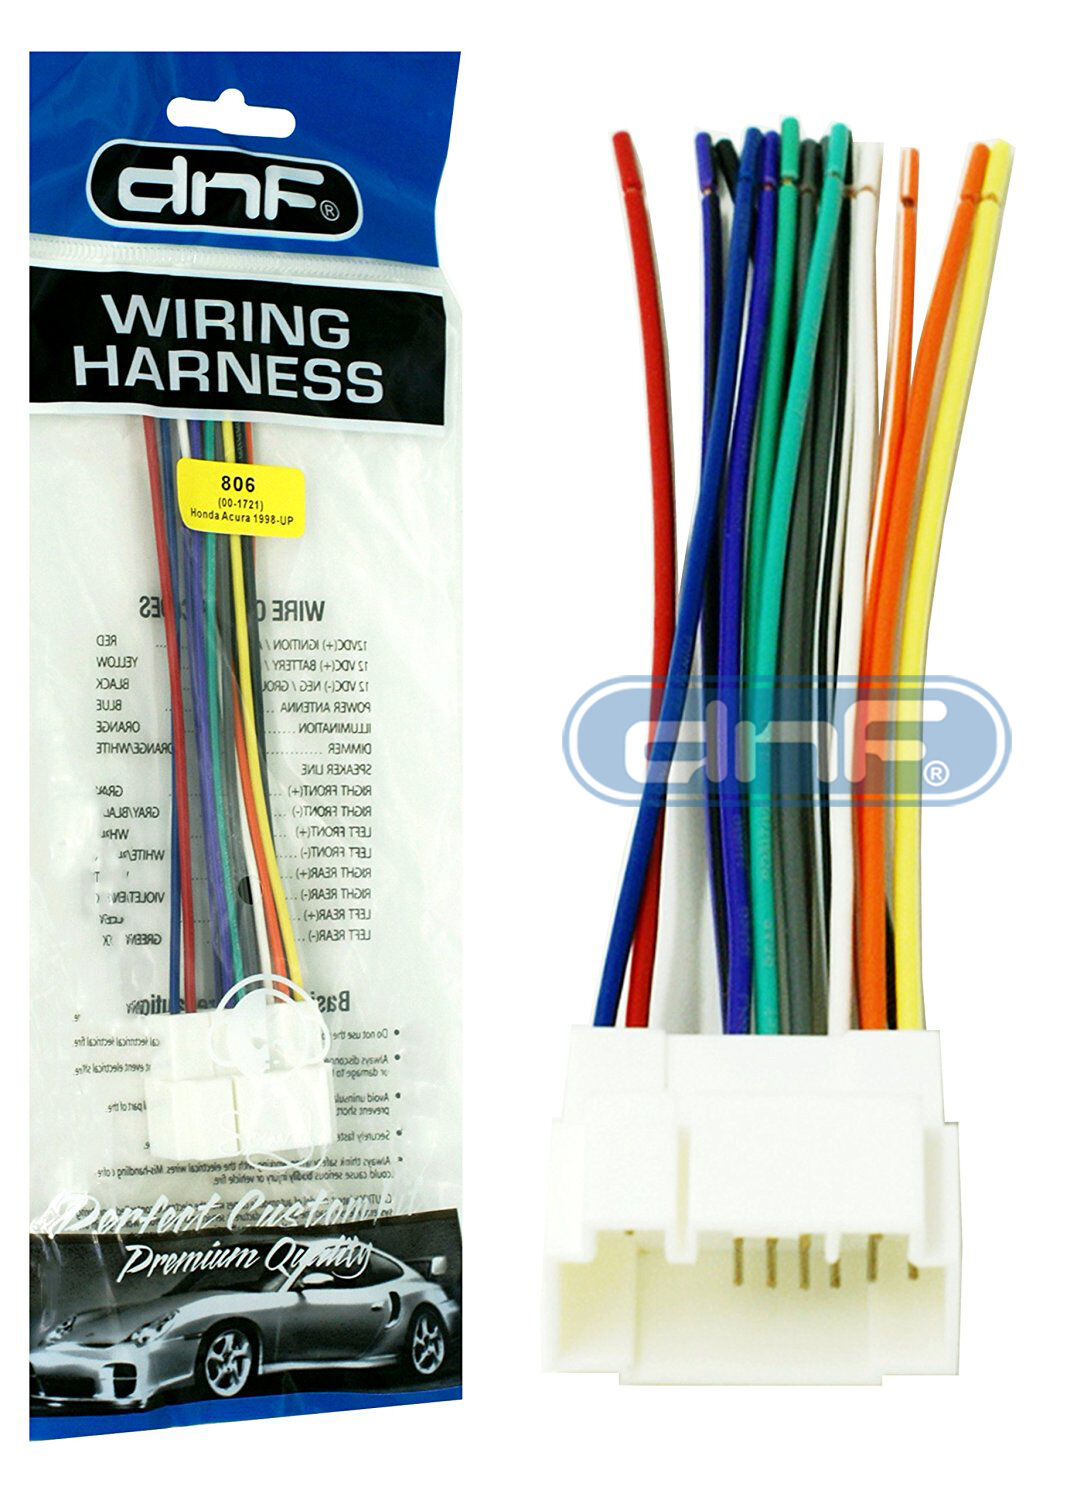 AFTERMARKET WIRE WIRING HARNESS FOR SELECT HONDA/ ACURA/ SUZUKI VEHICLES 70-1721